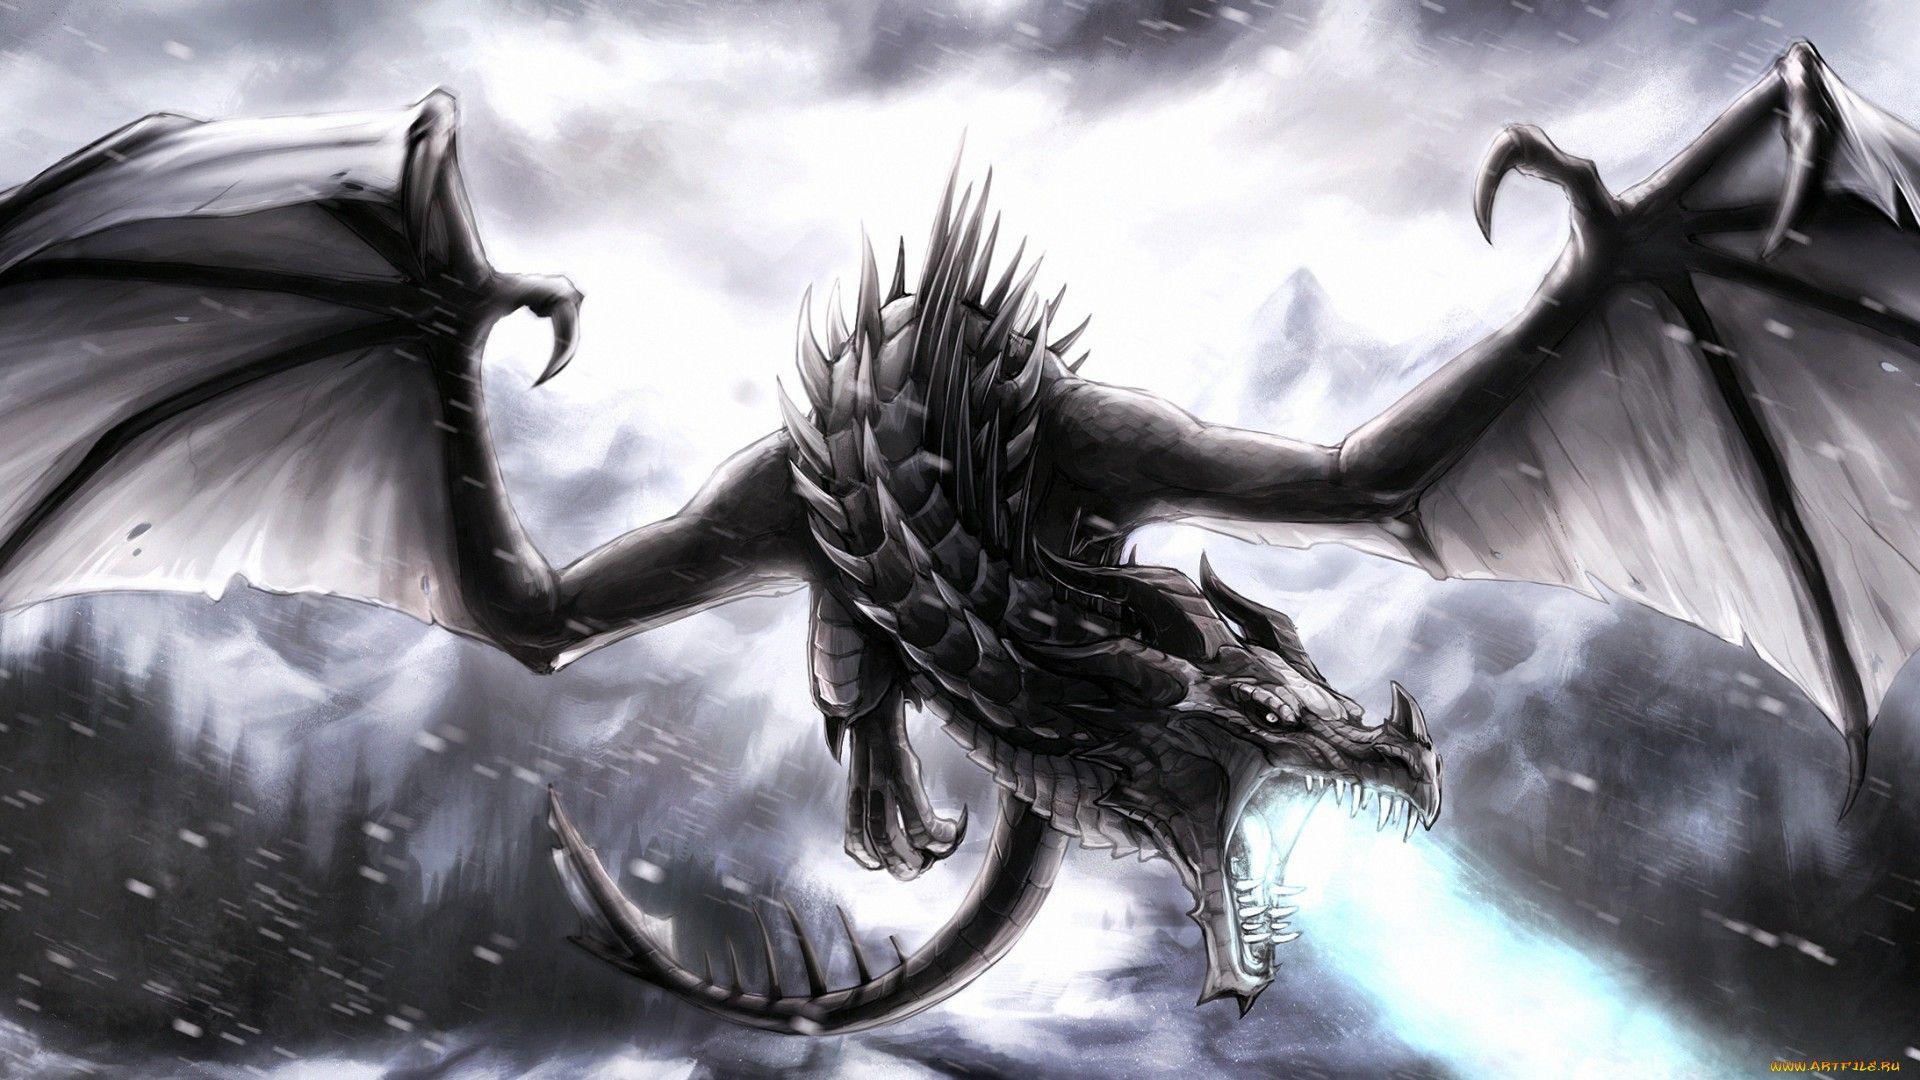 Black Dragon ! Full HD Wallpaper And Background Imagex1080